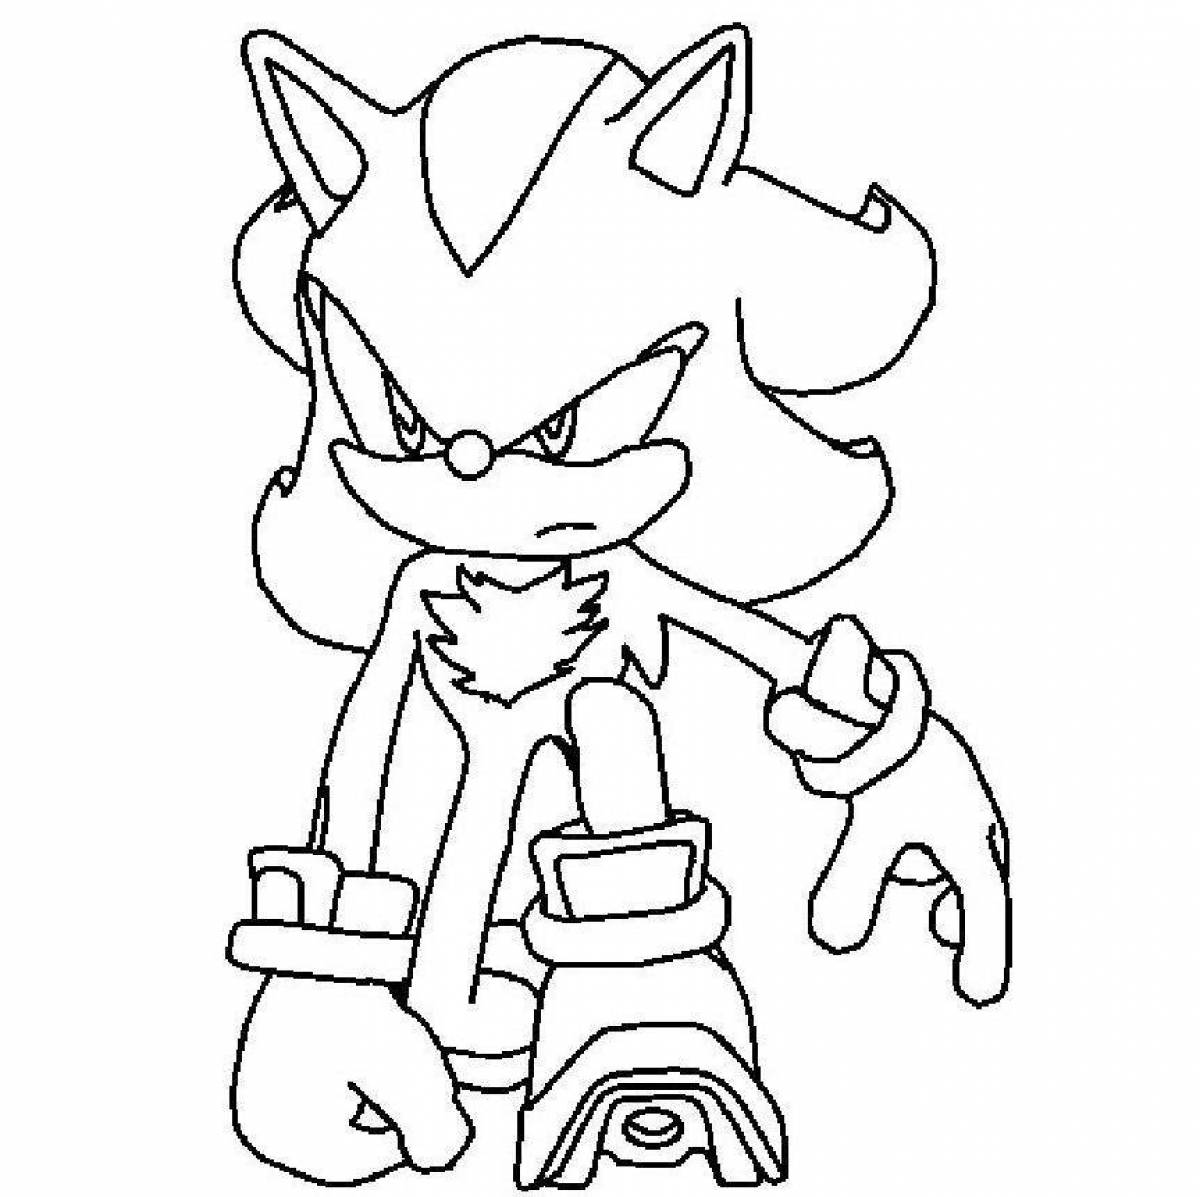 Fat shadow coloring page